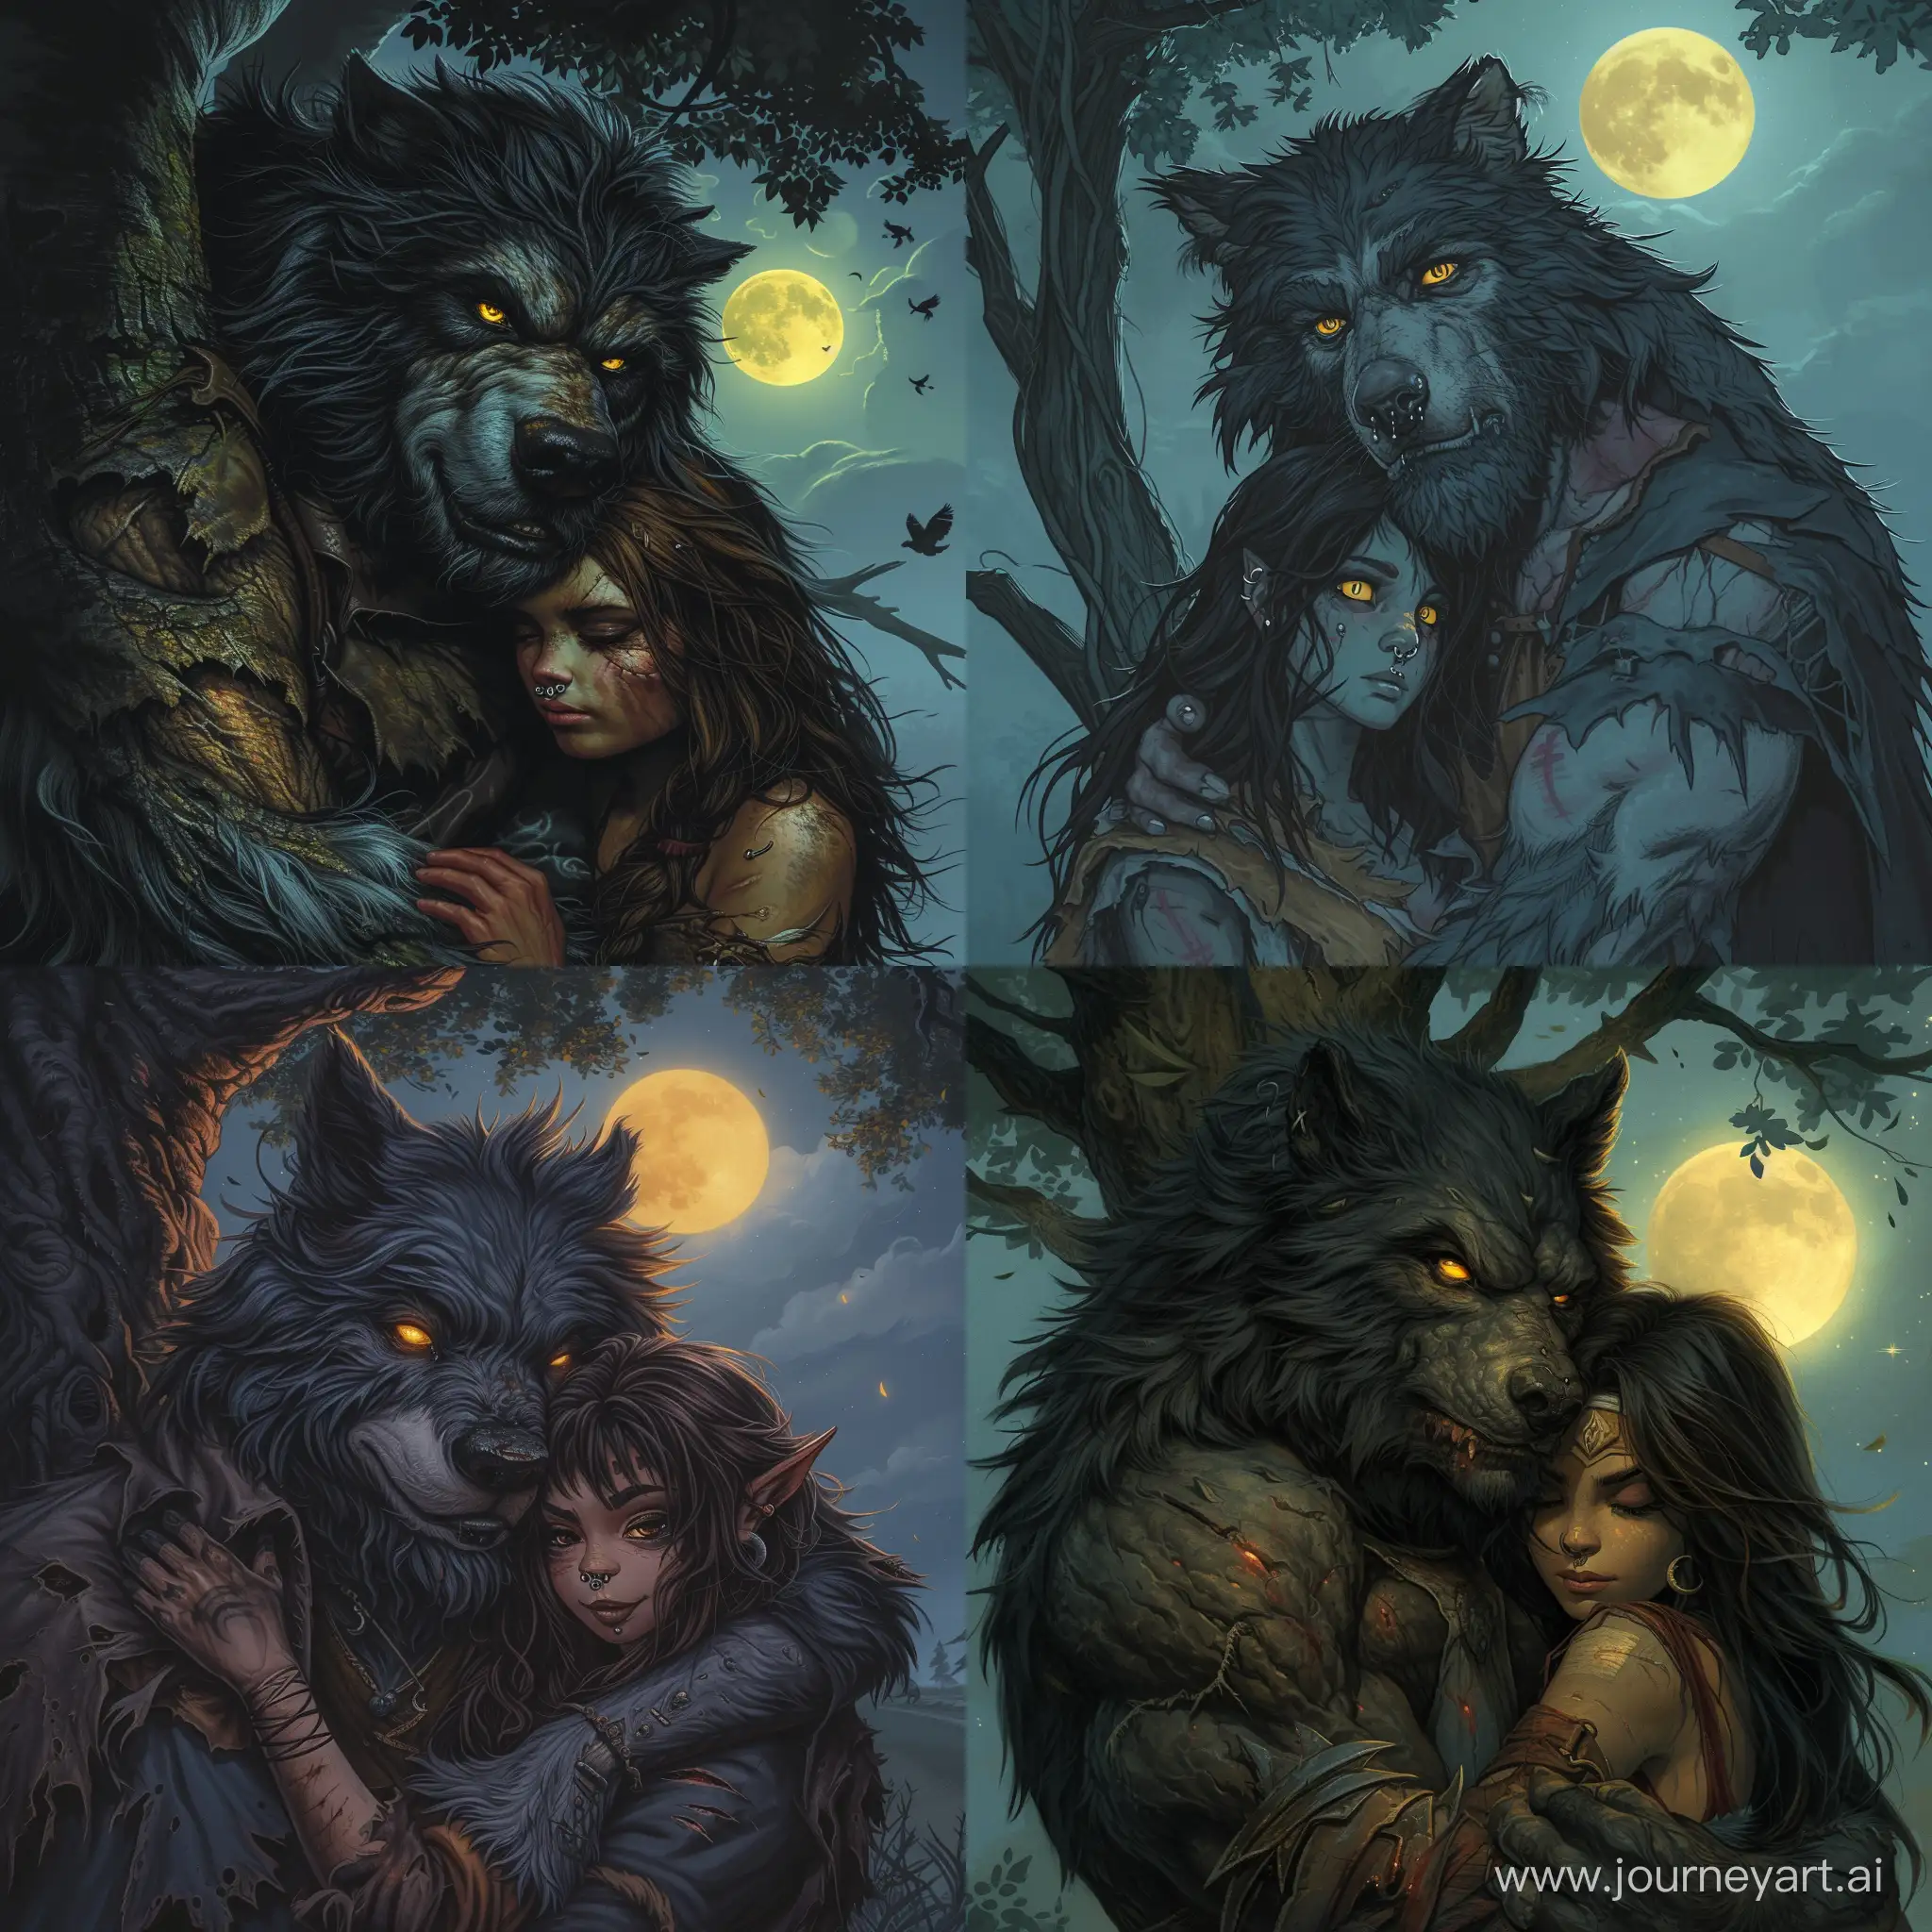 A grizzled and battle-hardened humanoid werewolf with fur as dark as midnight, Glowing yellow eyes that betray both intelligence and feral instincts, Wears tattered remnants of torn clothing, showcasing the scars and markings of countless battles, getting hugged peacefully by  a cute humanoid wolf girl that wears a nose piercing under the tree and full moon in the sky, 1970's dark fantasy style, grim dark, gritty, detailed